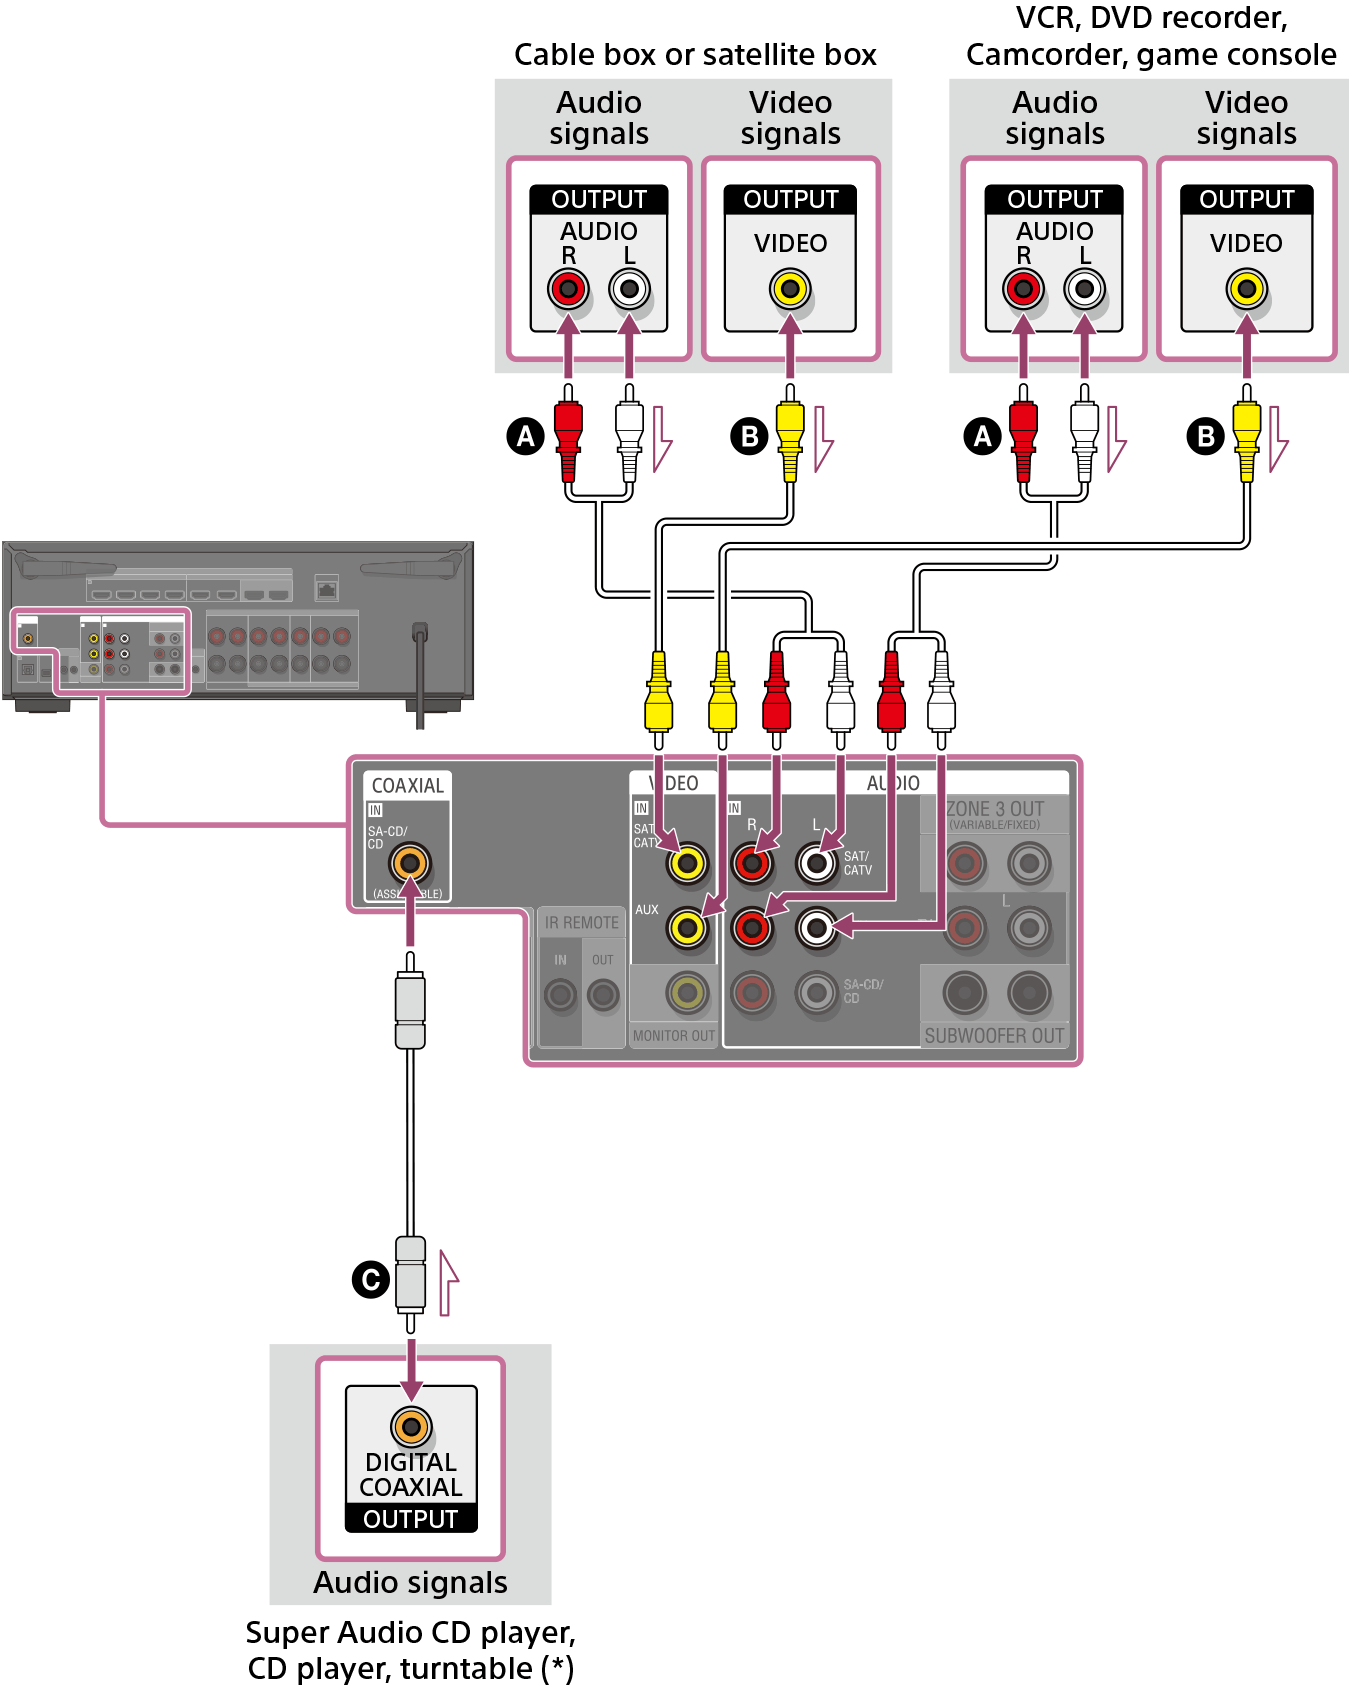 Illustration of connecting the unit and devices using the video and audio cables. The VIDEO IN and AUDIO IN jacks on the rear of the unit are labeled with input names. Use the VIDEO IN and AUDIO IN jacks marked with the same names in combination. For devices with DIGITAL COAXIAL OUTPUT jacks, we recommend using a coaxial digital cable instead of an audio cable for connection. In this case, connect the COAXIAL IN SA-CD/CD jack on the rear of the unit with the DIGITAL COAXIAL OUTPUT jack on the device using a coaxial digital cable (not supplied).